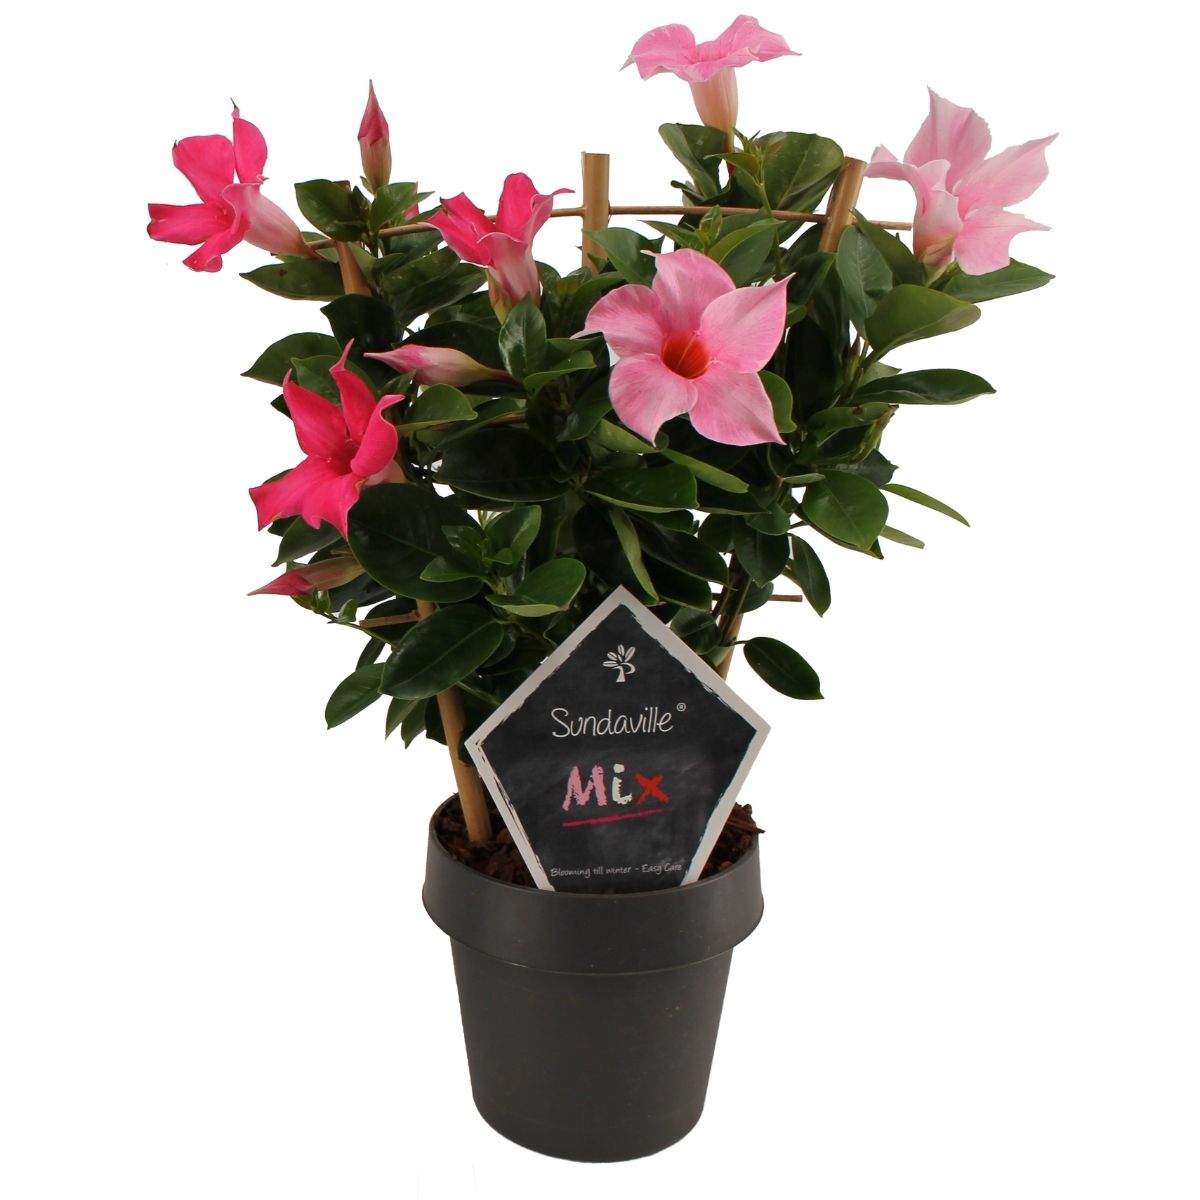 Mandevilla light pink and pink petals, black flower pot, green leaves and tag with text